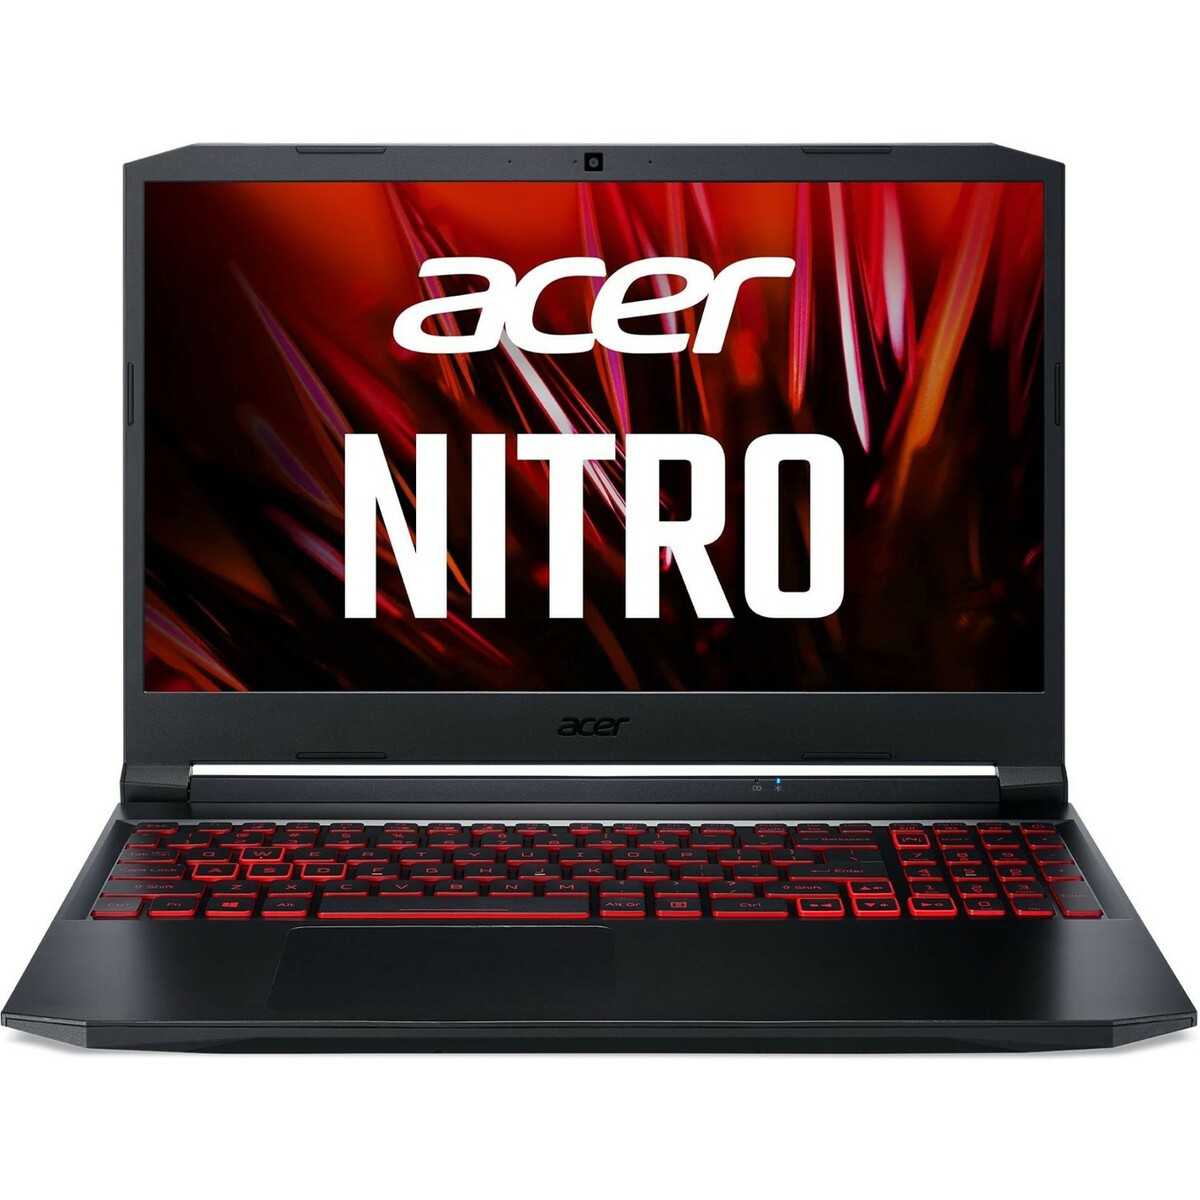 Acer Nitro 5 AN515-45 Gaming Notebook AMD R7 15.6" Win 10 Shale Black